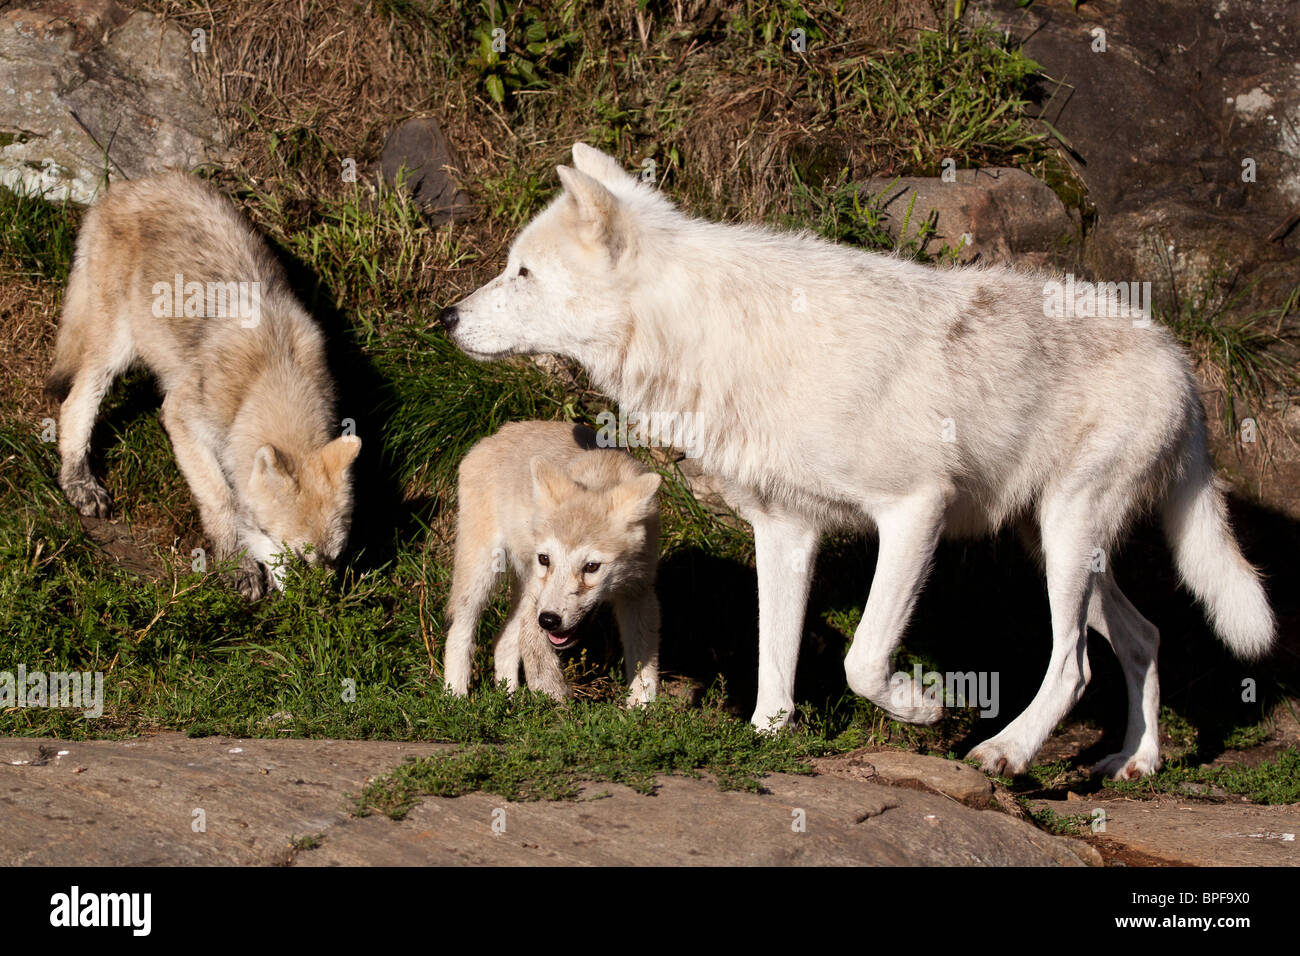 A family of arctic wolves near grass and rocks. Stock Photo